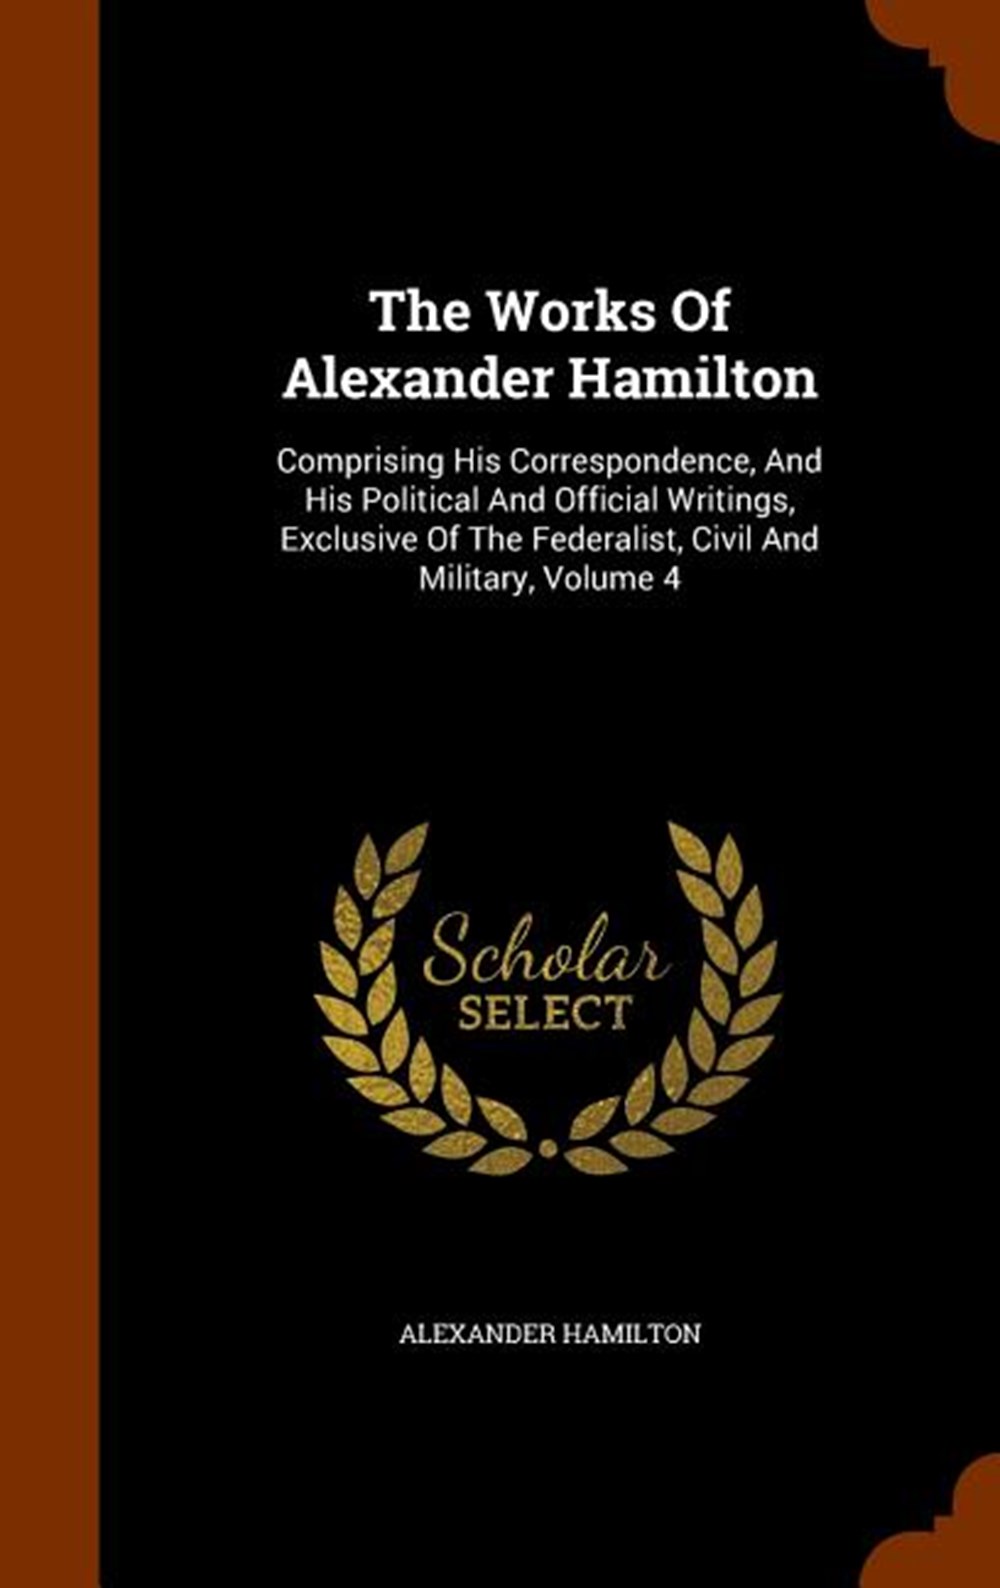 Works Of Alexander Hamilton: Comprising His Correspondence, And His Political And Official Writings,